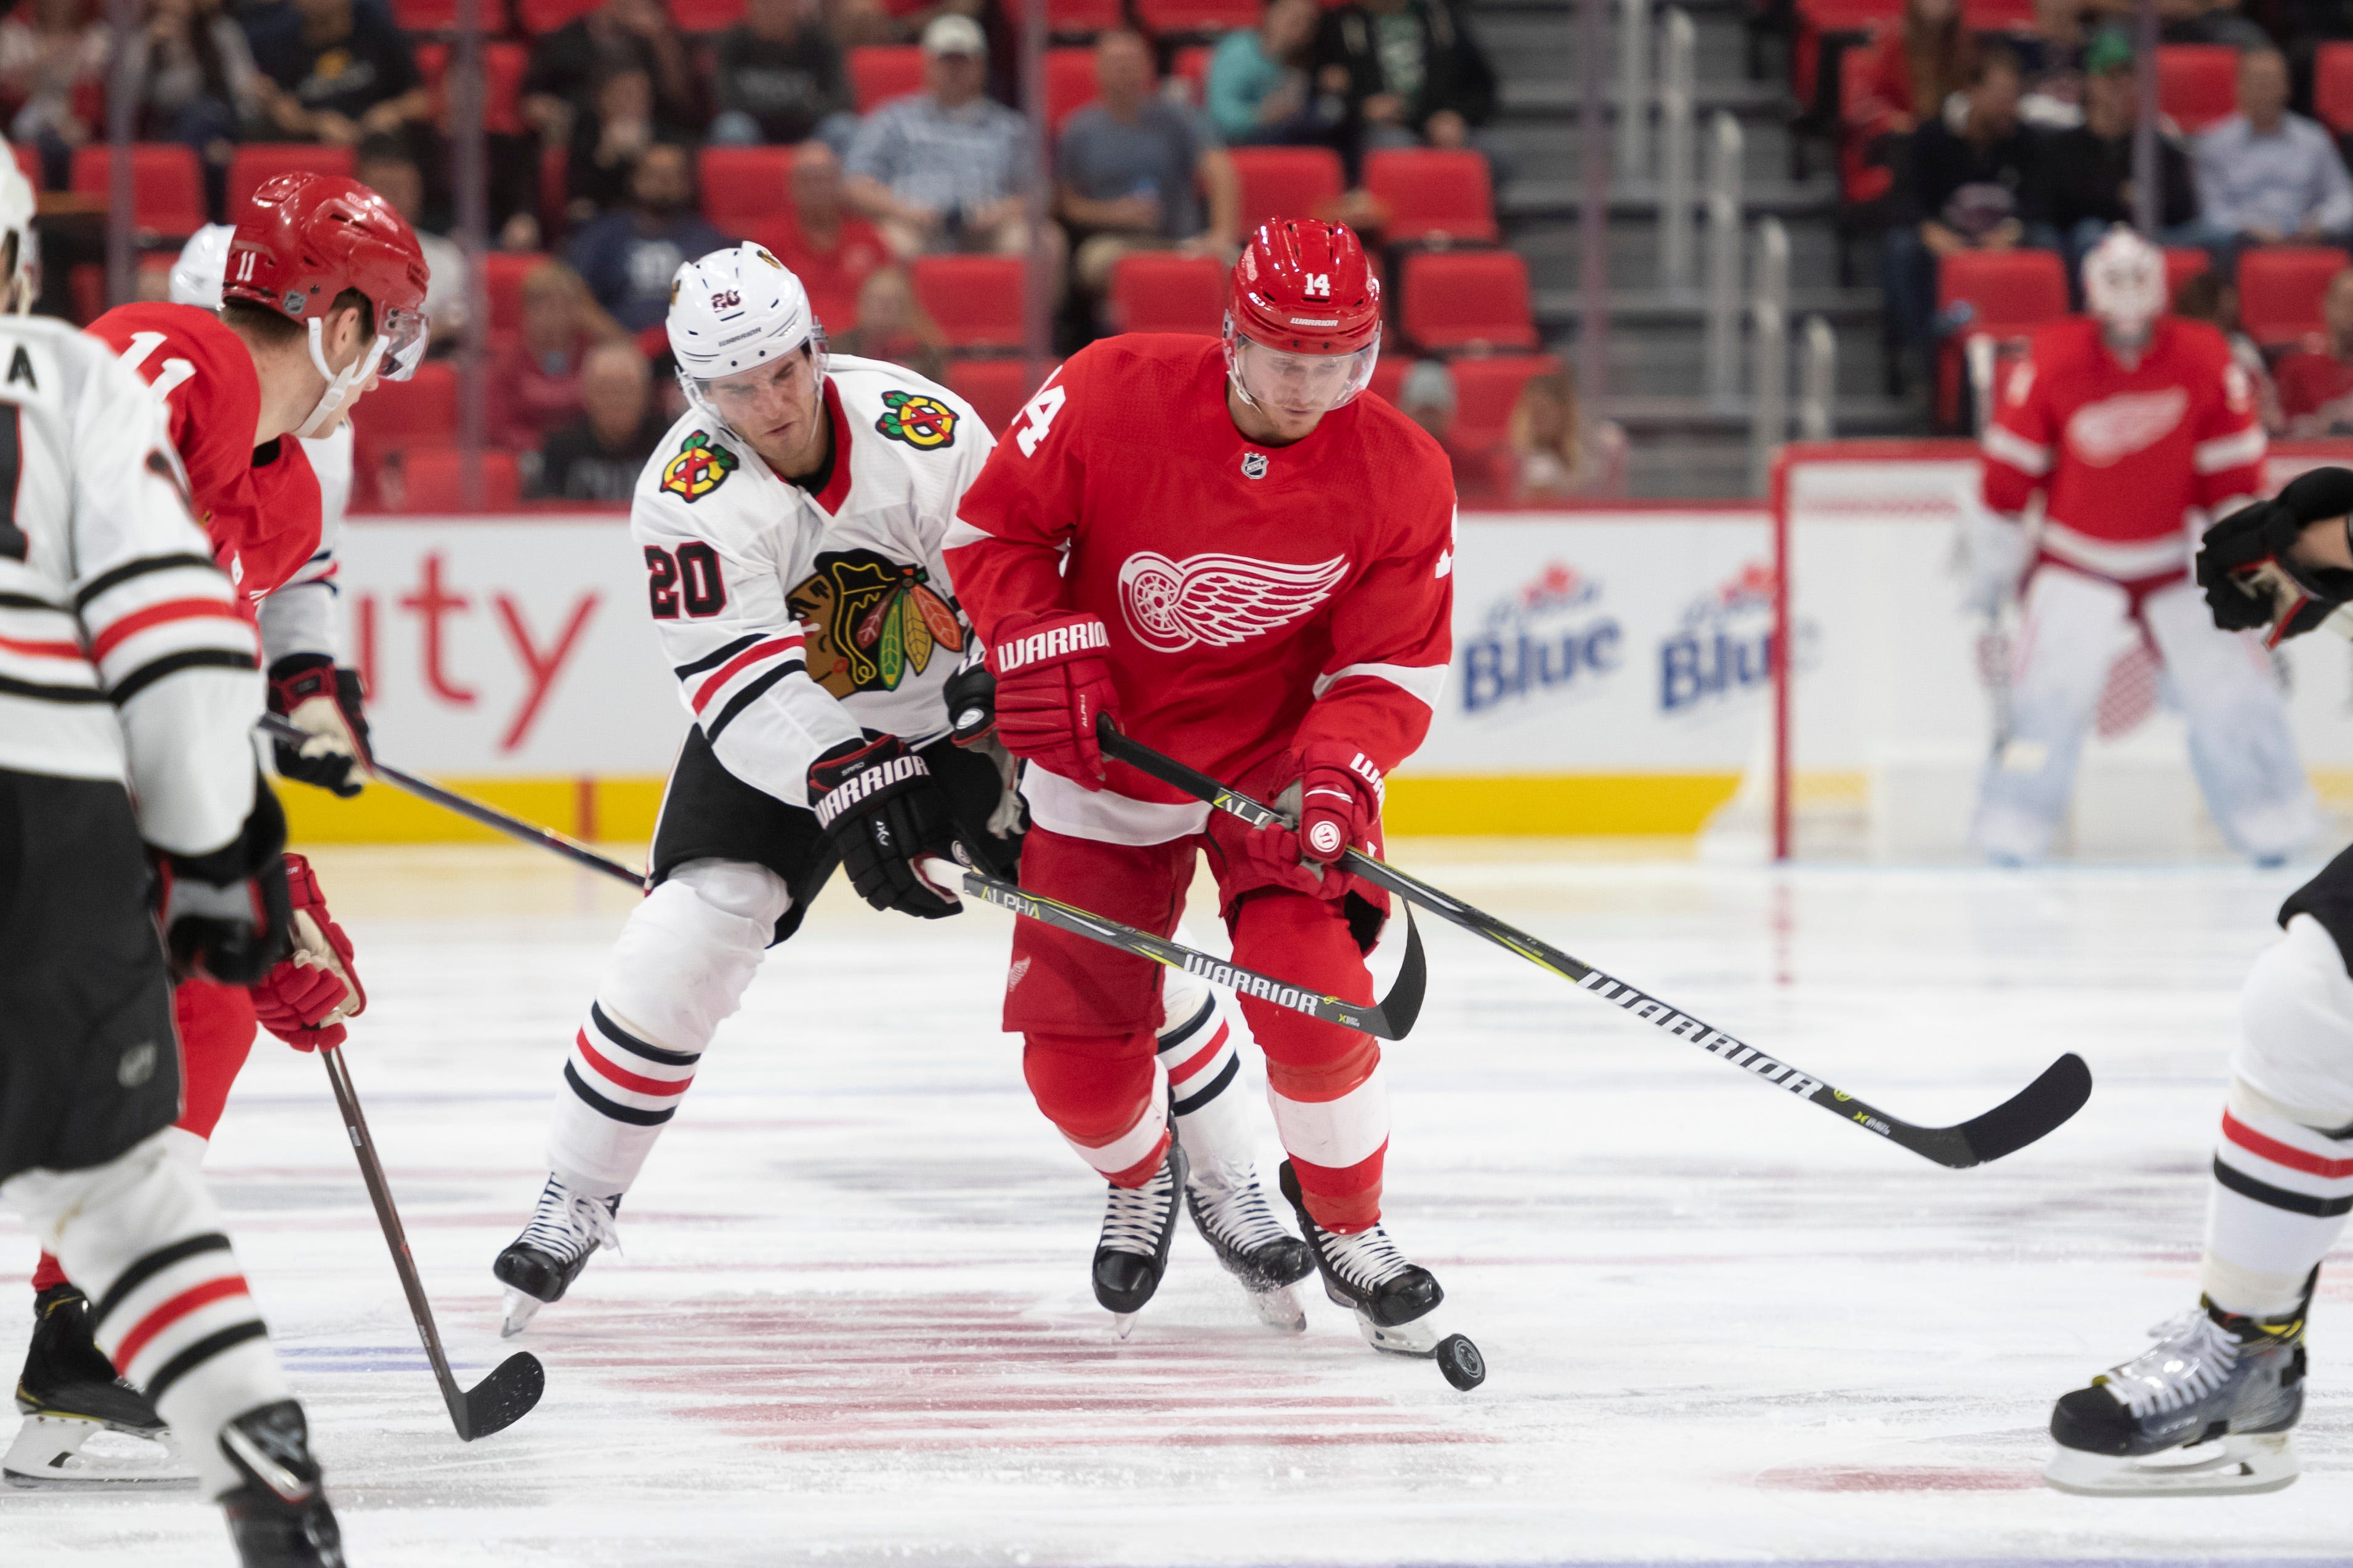 Detroit center Gustav Nyquist keeps the puck away from Chicago left wing Brandon Saad in the third period.